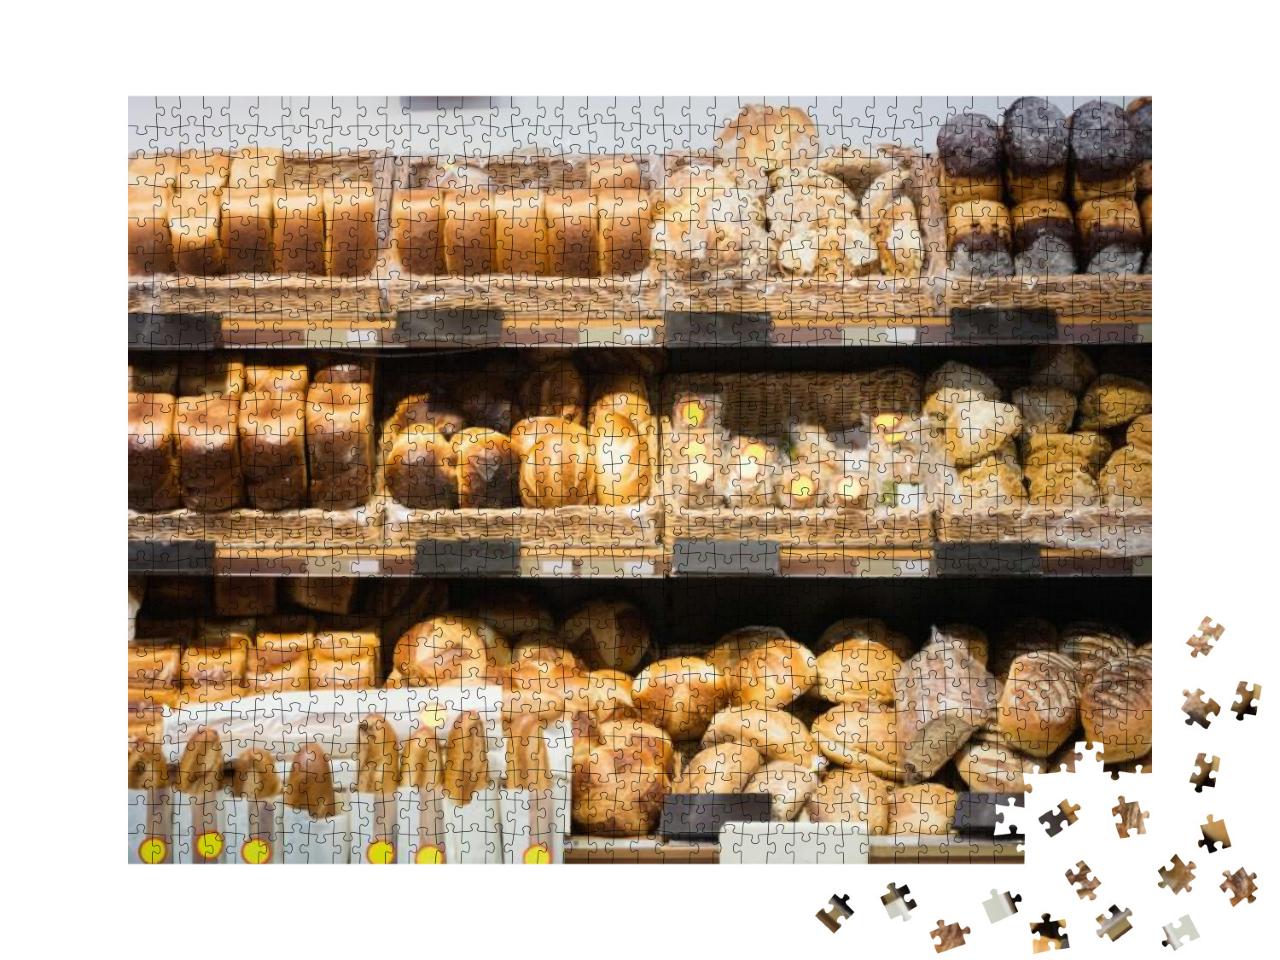 Focus on Shelves with Bread in a Supermarket... Jigsaw Puzzle with 1000 pieces